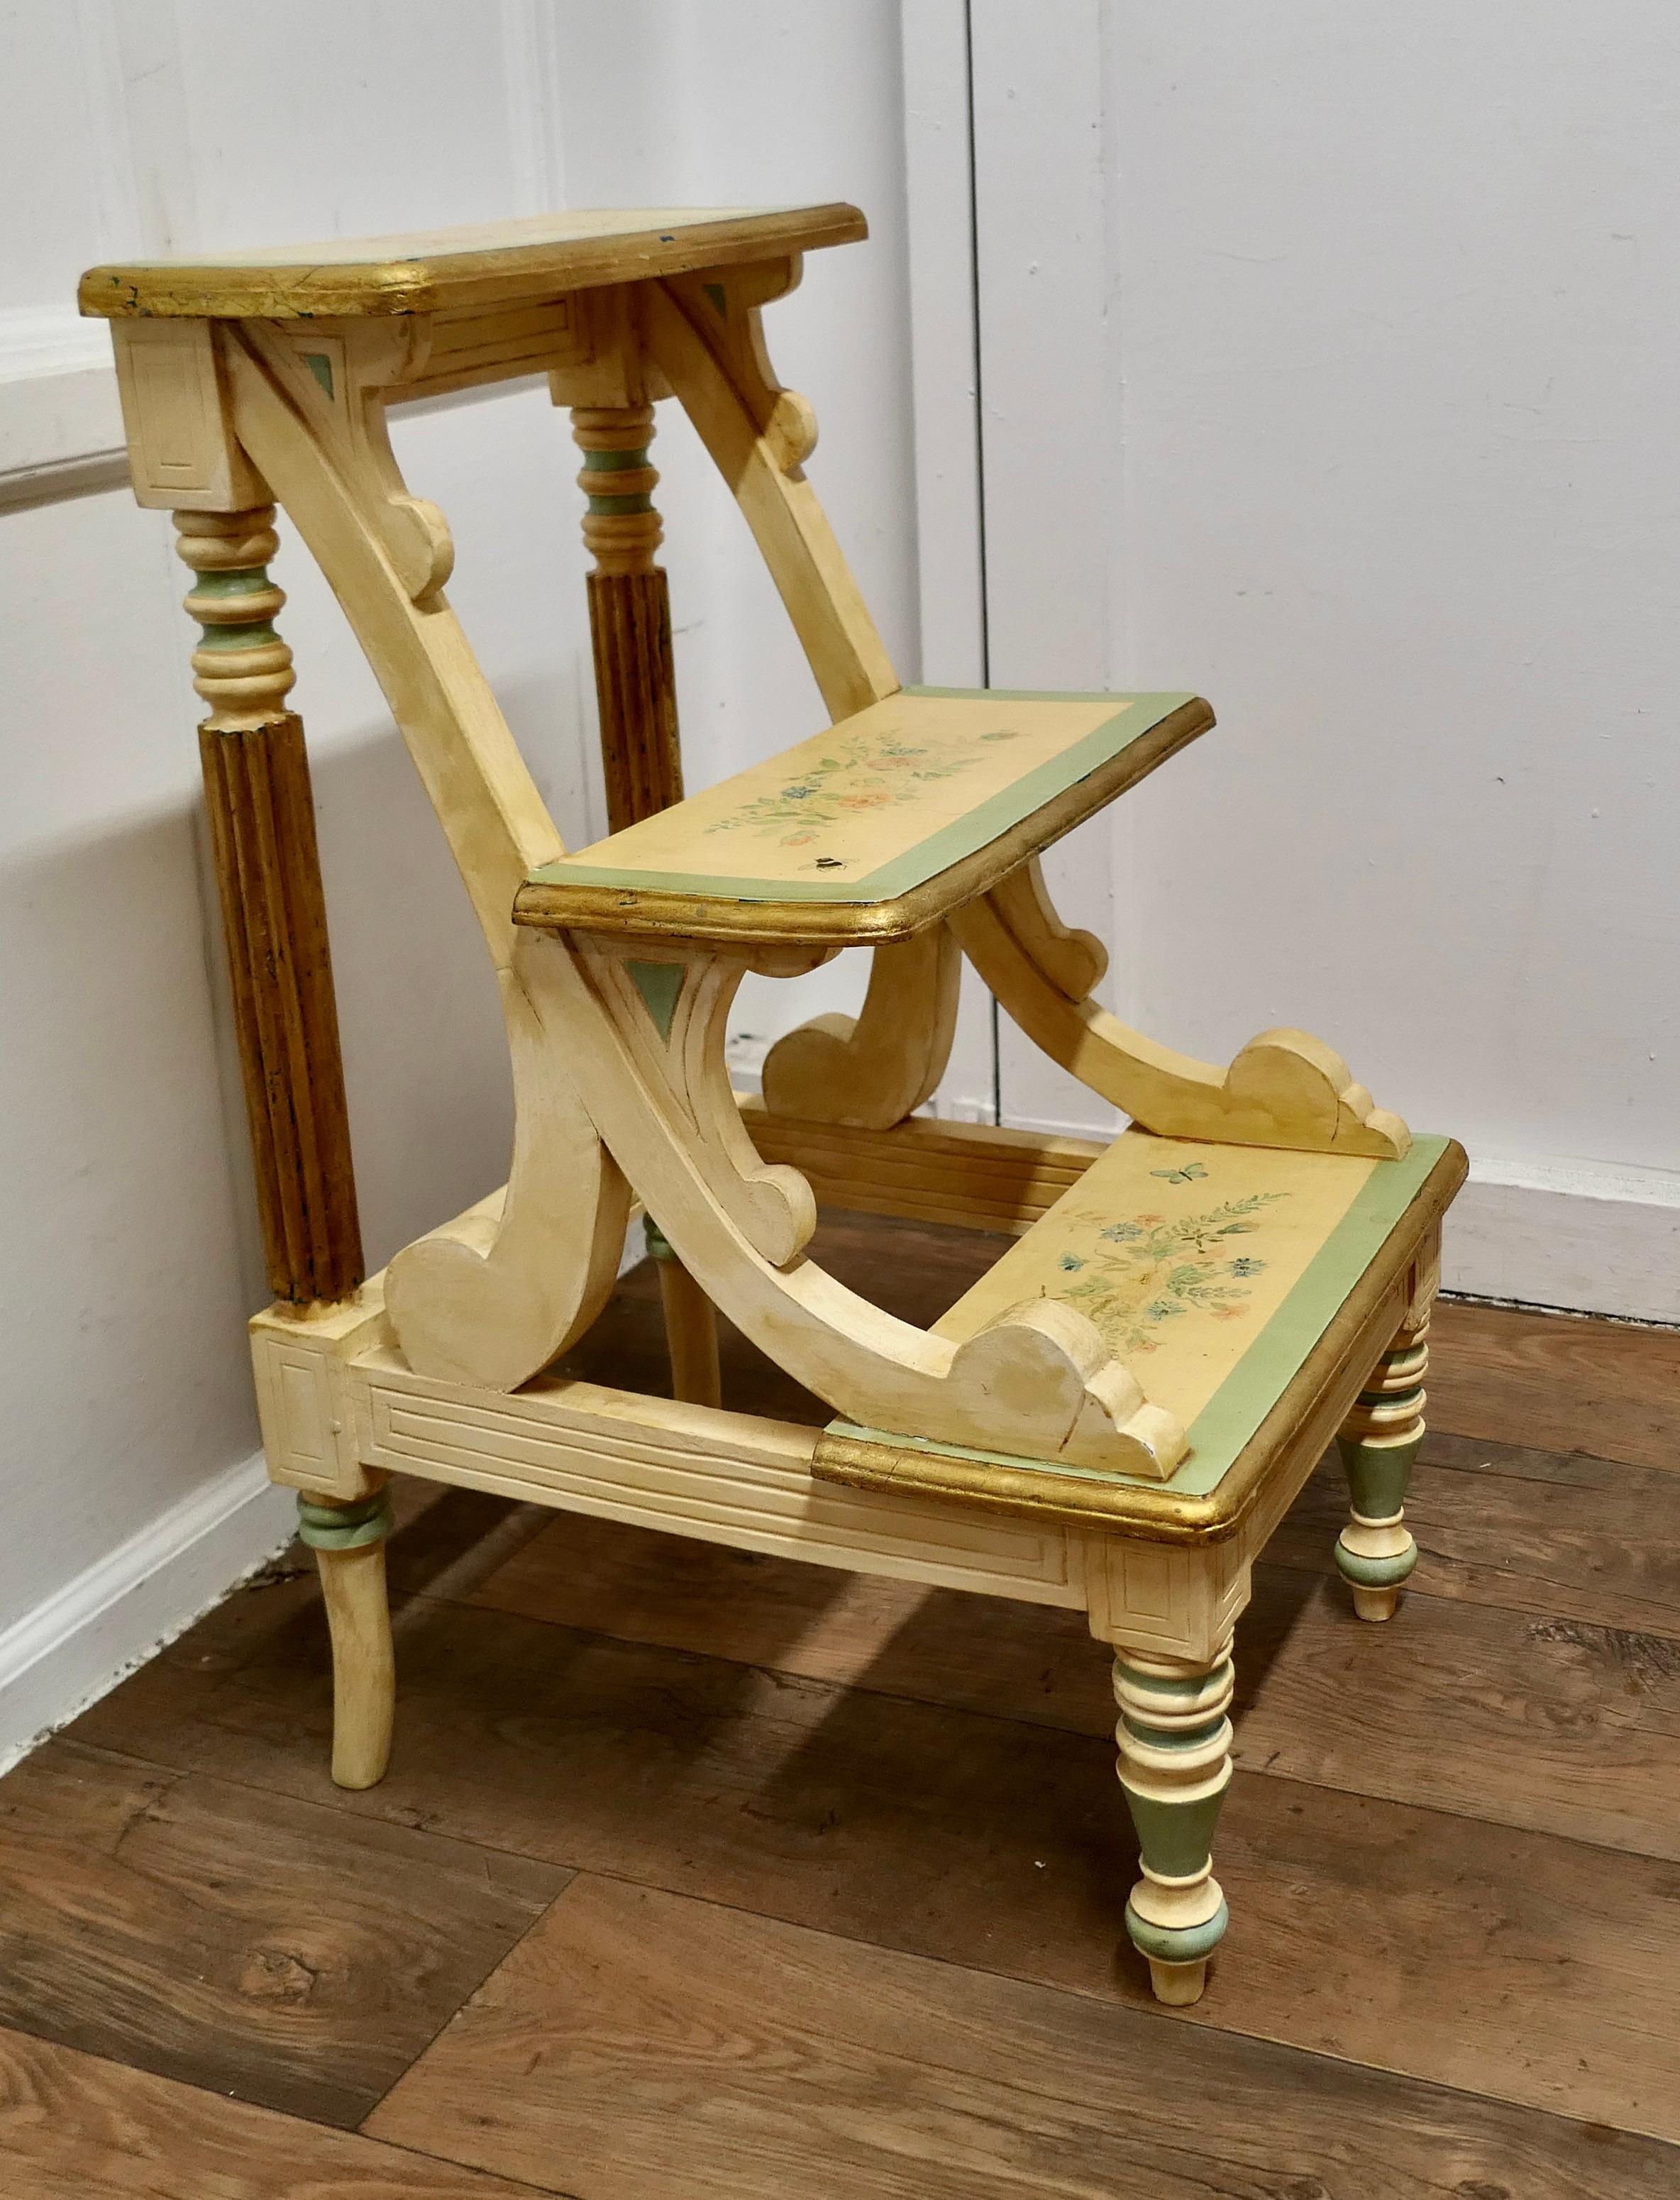 Regency Style Painted Library Steps
 
This is a sturdy solid piece there are 3 steps, the ladder is pointed in the Regency style in Cream, Green and Gold with pretty floral detail with bees and butterflies
The ladder would make a superb useful and